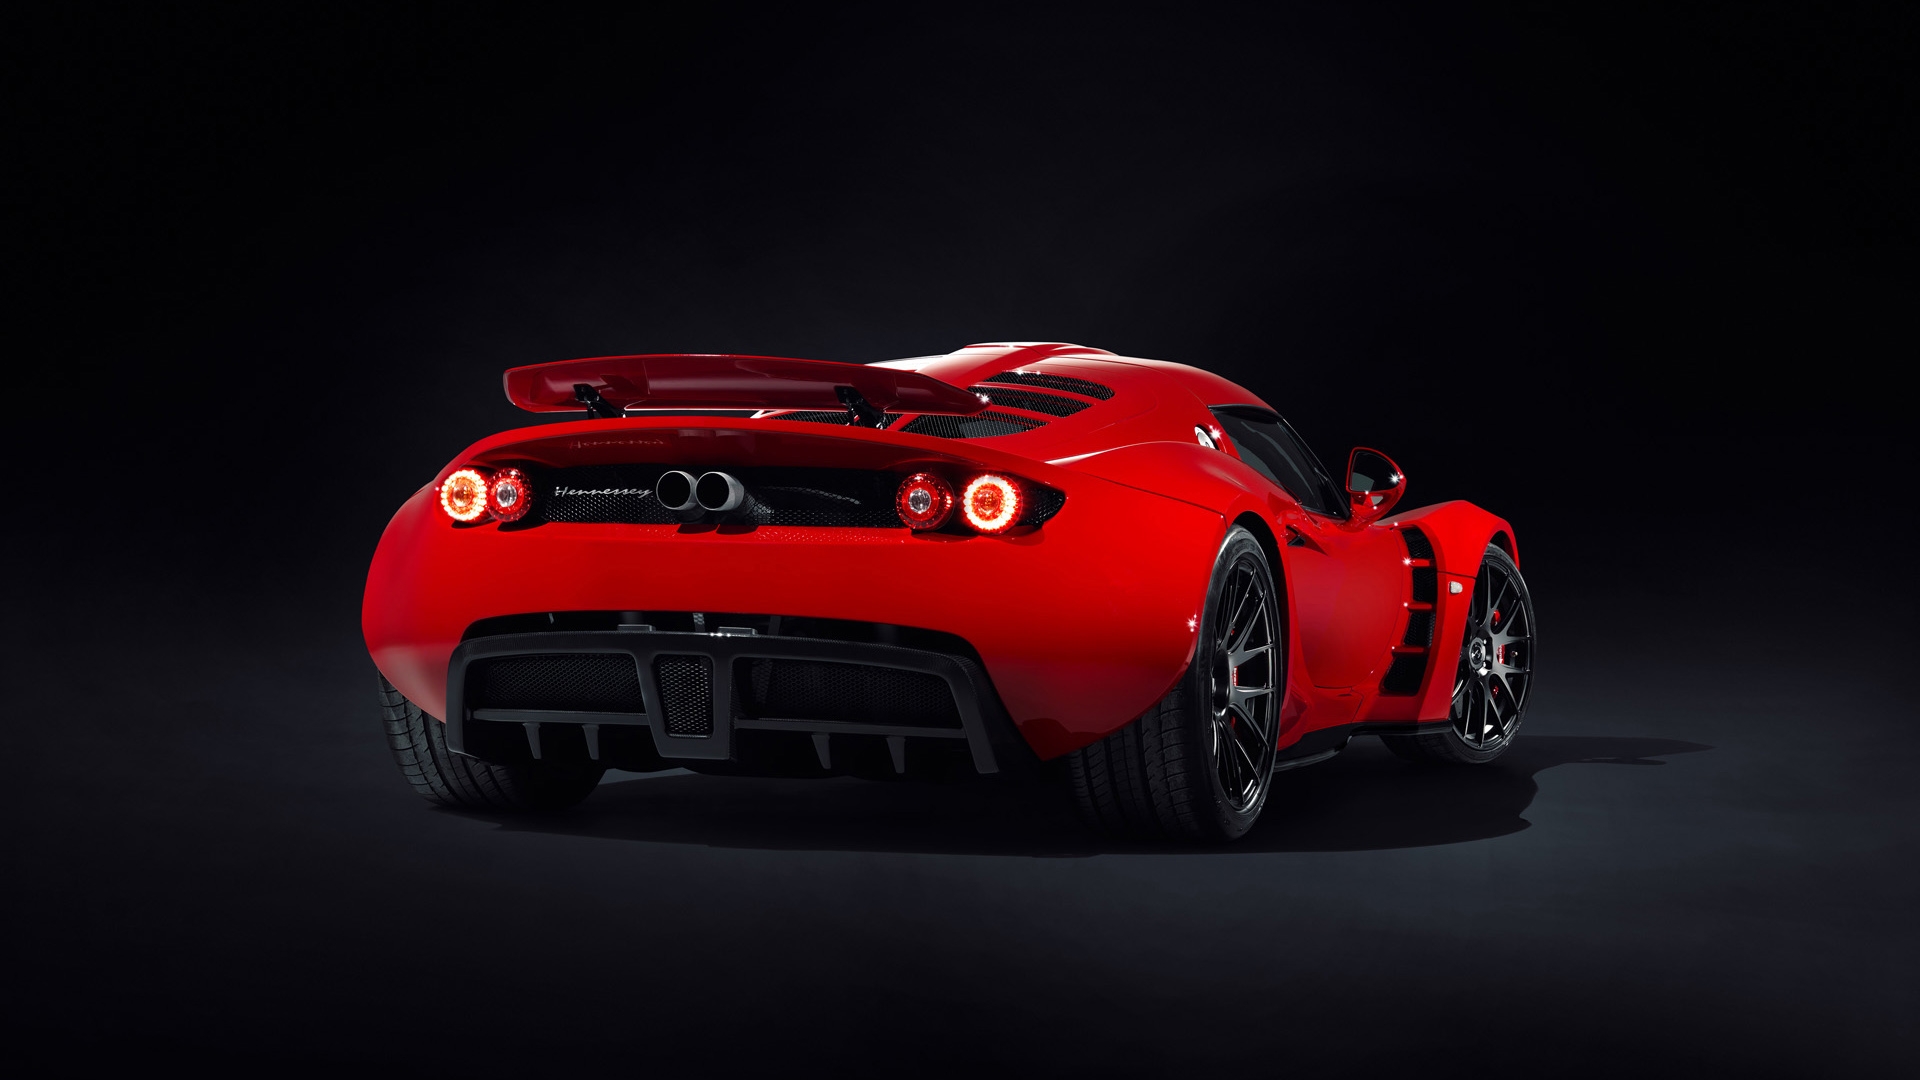 Hennessey Venom GT rear High Definition Wallpapers HD wallpapers